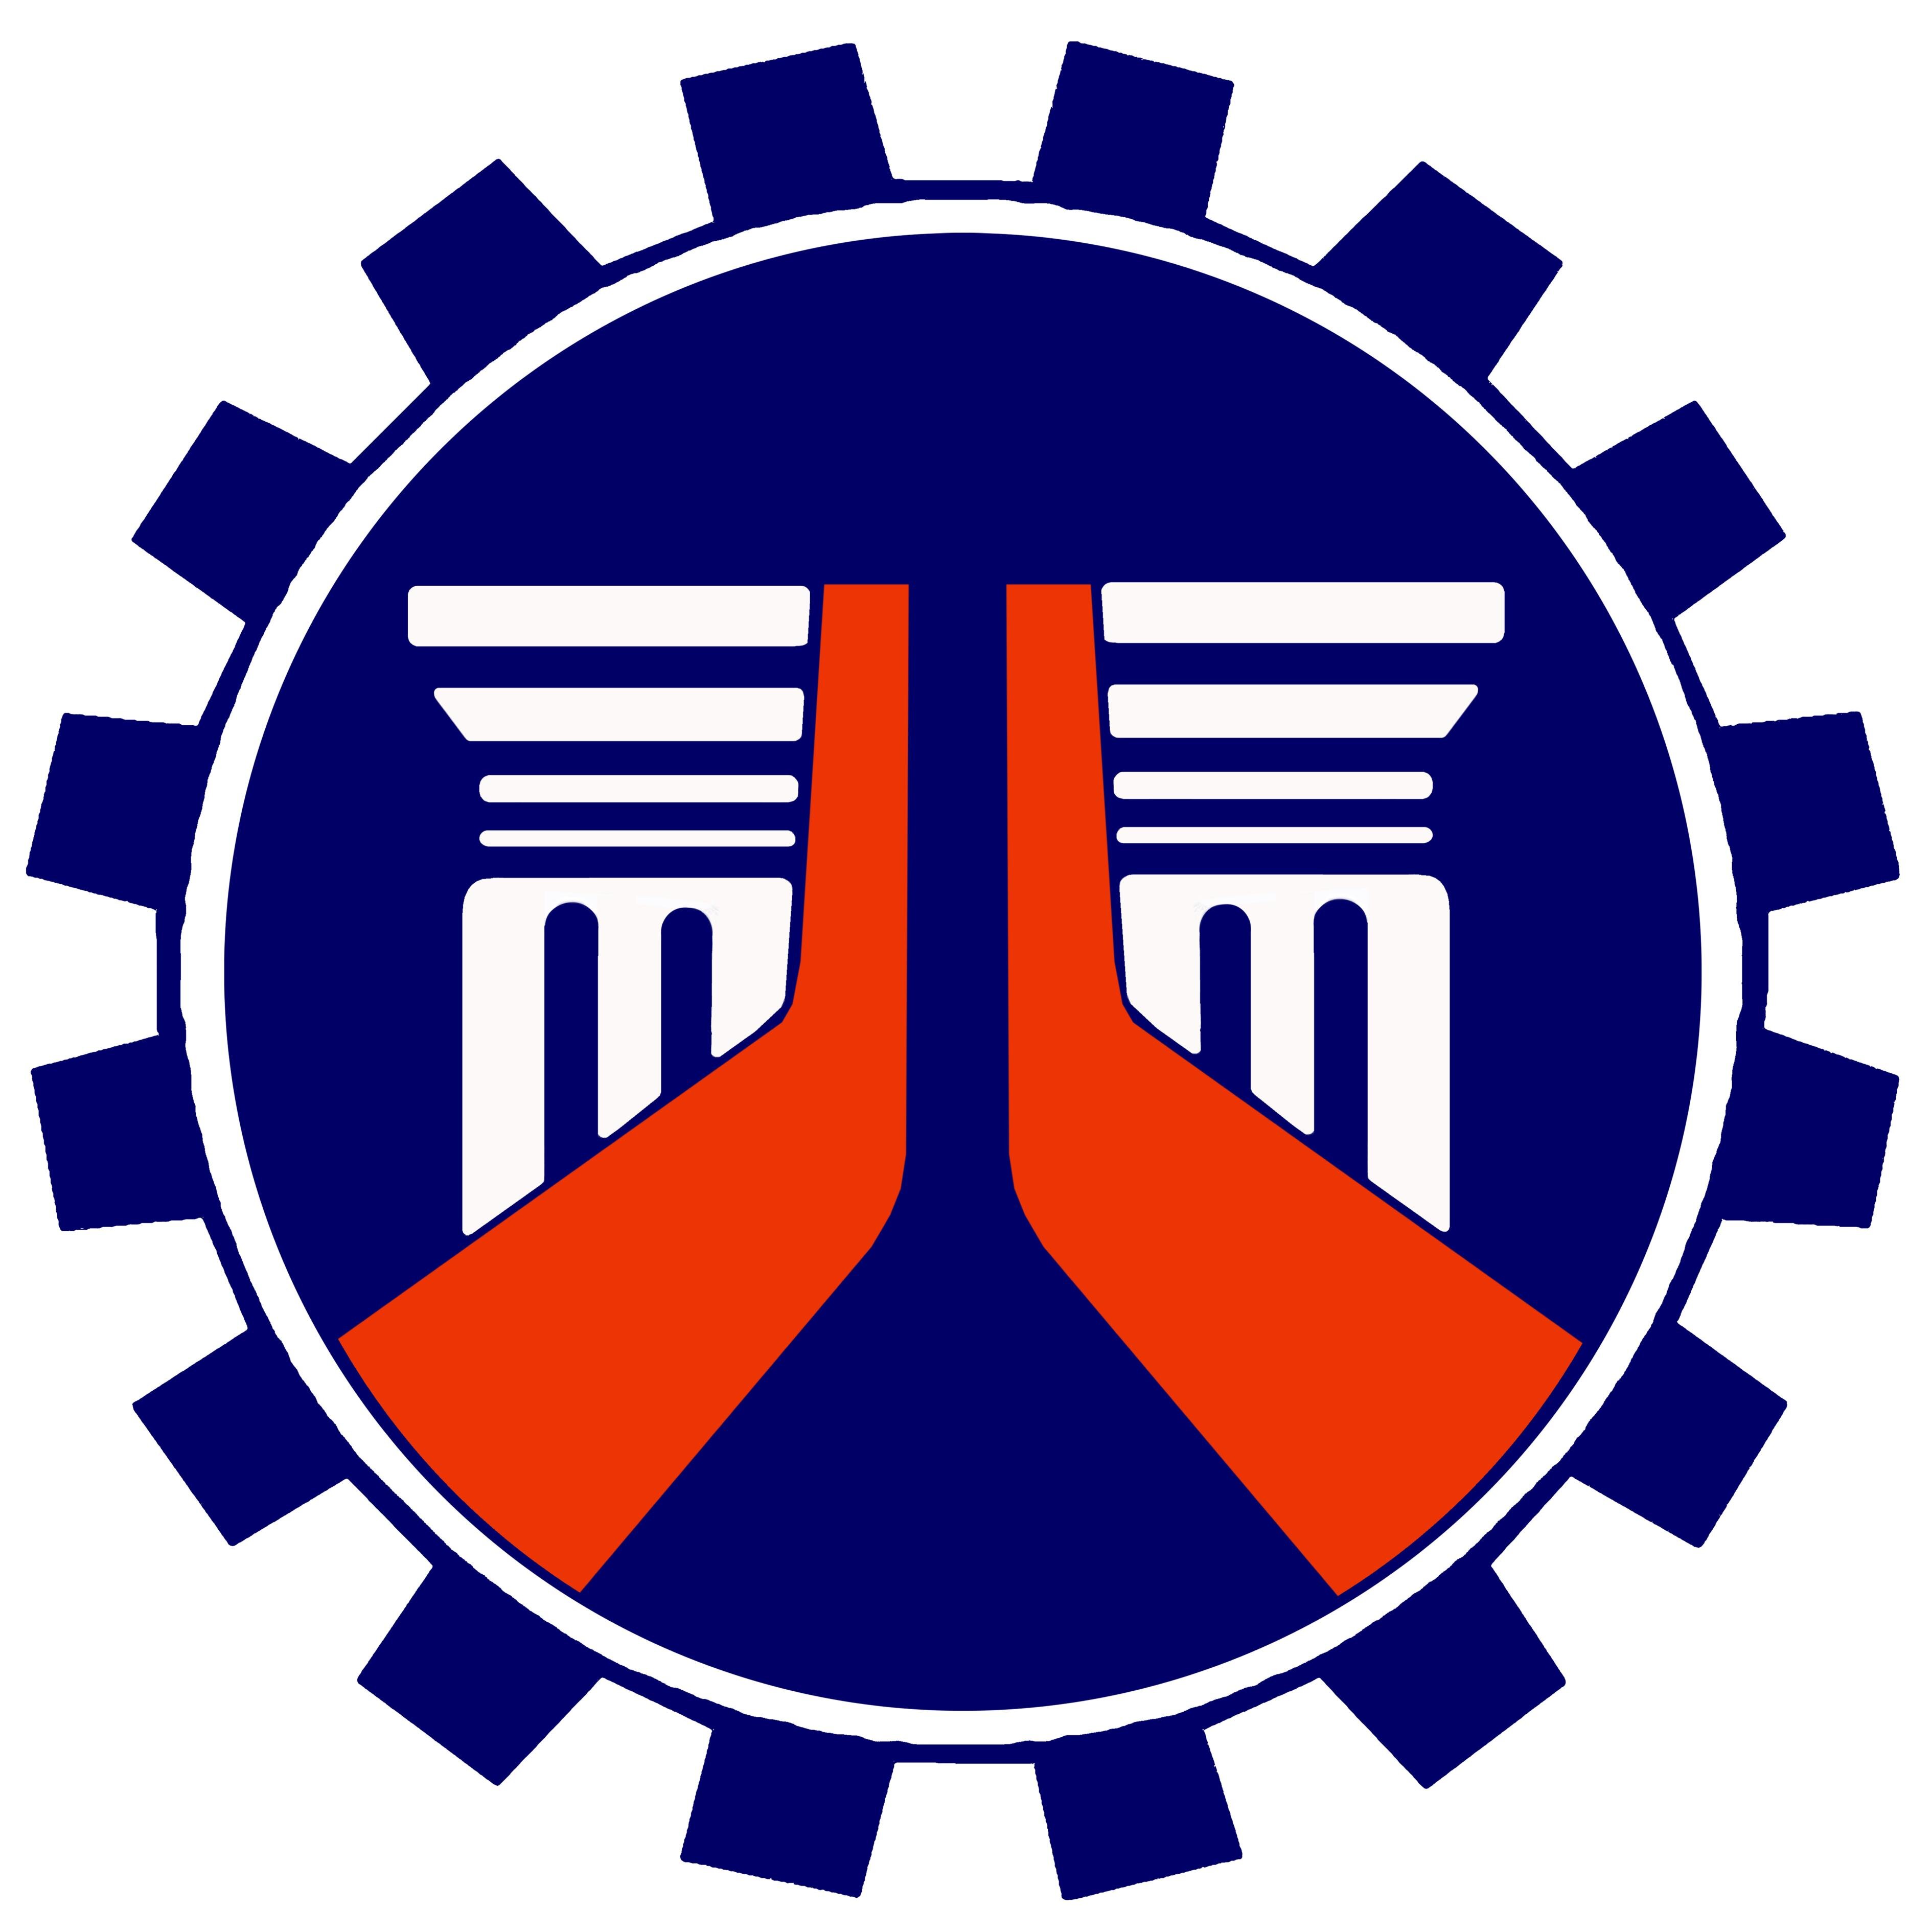 Official account of the Department of Public Works and Highways (DPWH) - the engineering and construction arm of the government of the Philippines.